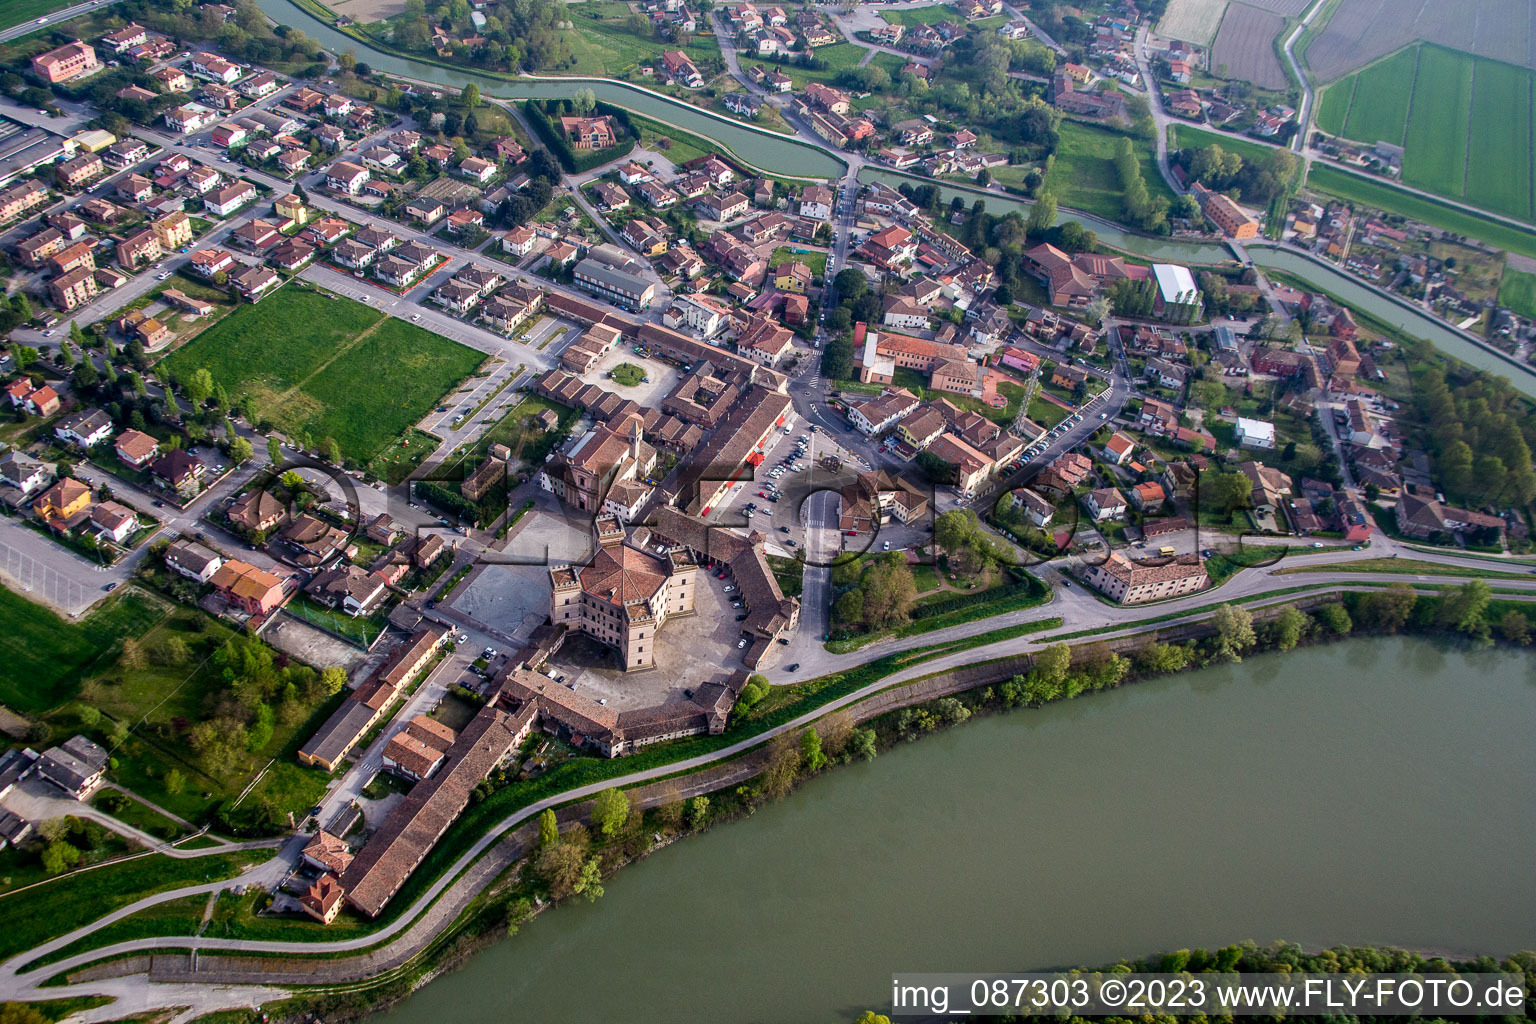 Bird's eye view of Mesola in the state Emilia Romagna, Italy